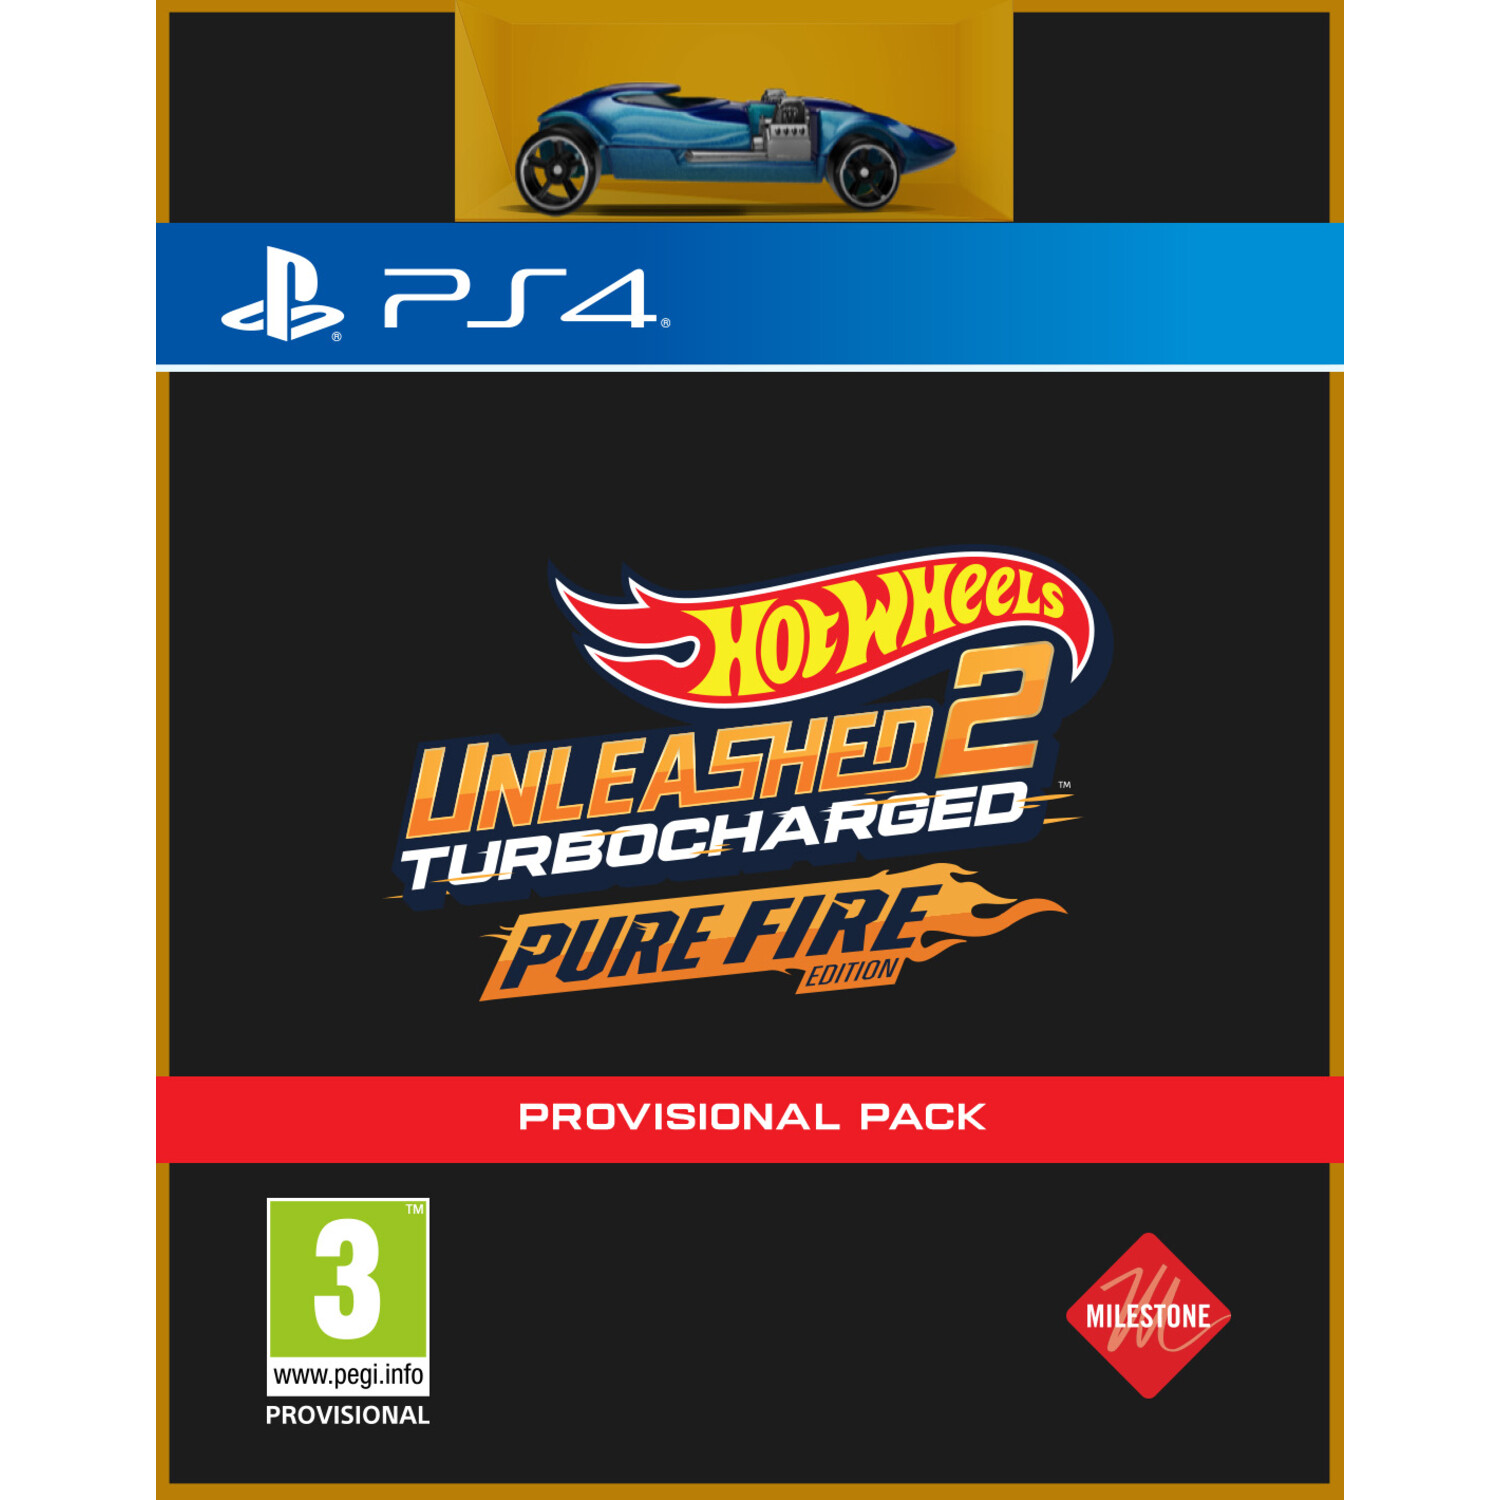 Edition Pure Fire Hot PS4 Unleashed 2: Turbocharged - Wheels